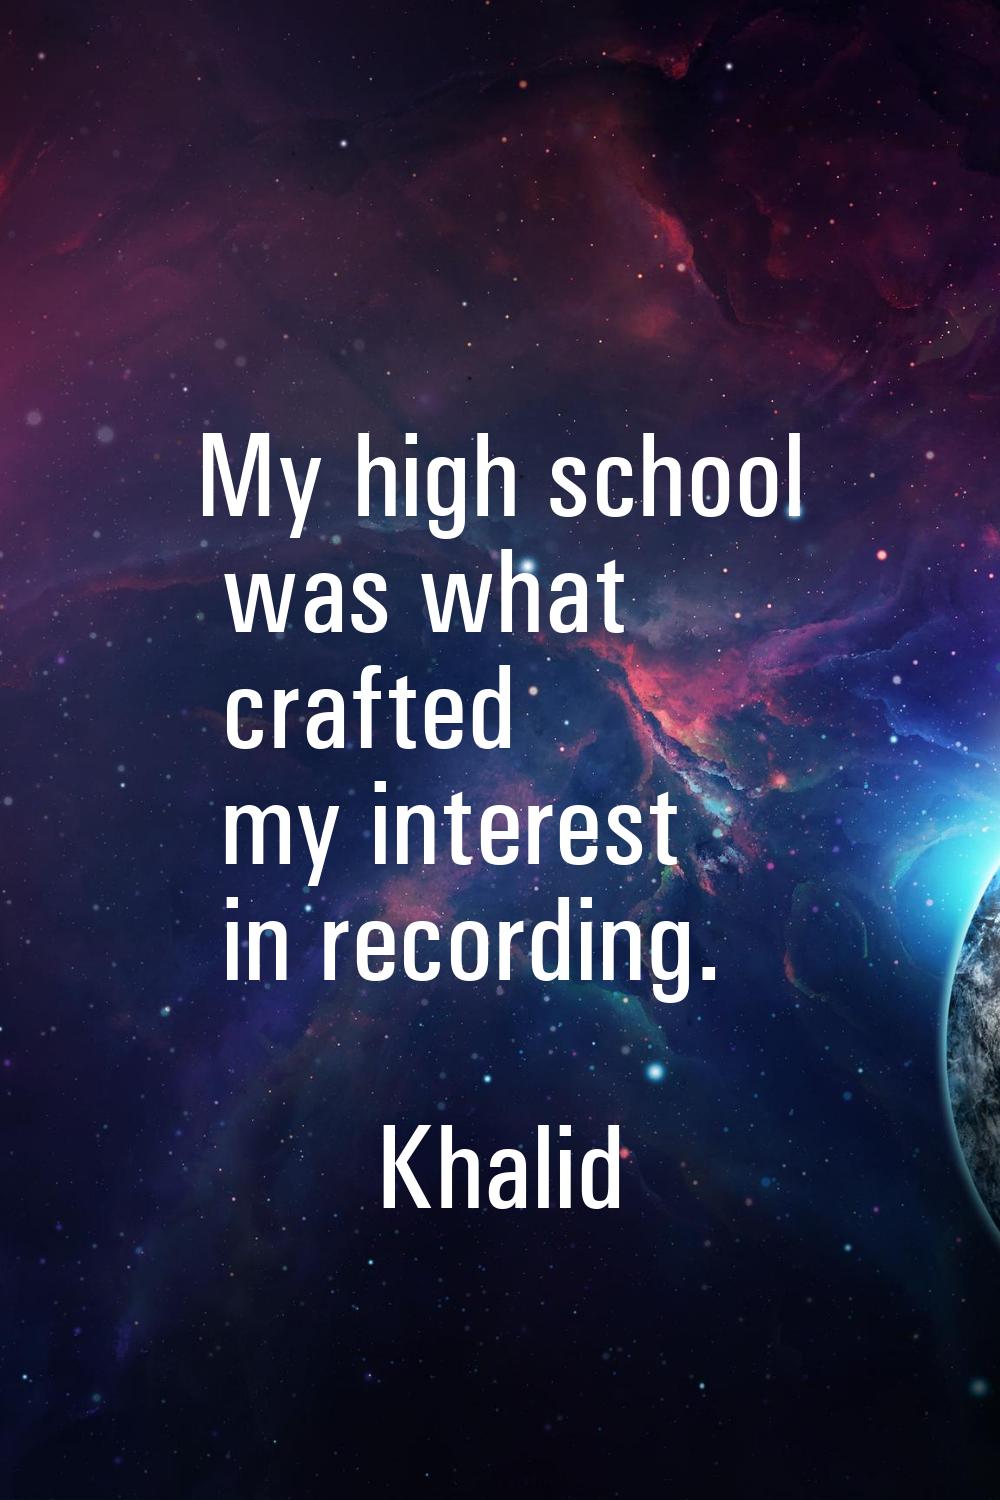 My high school was what crafted my interest in recording.